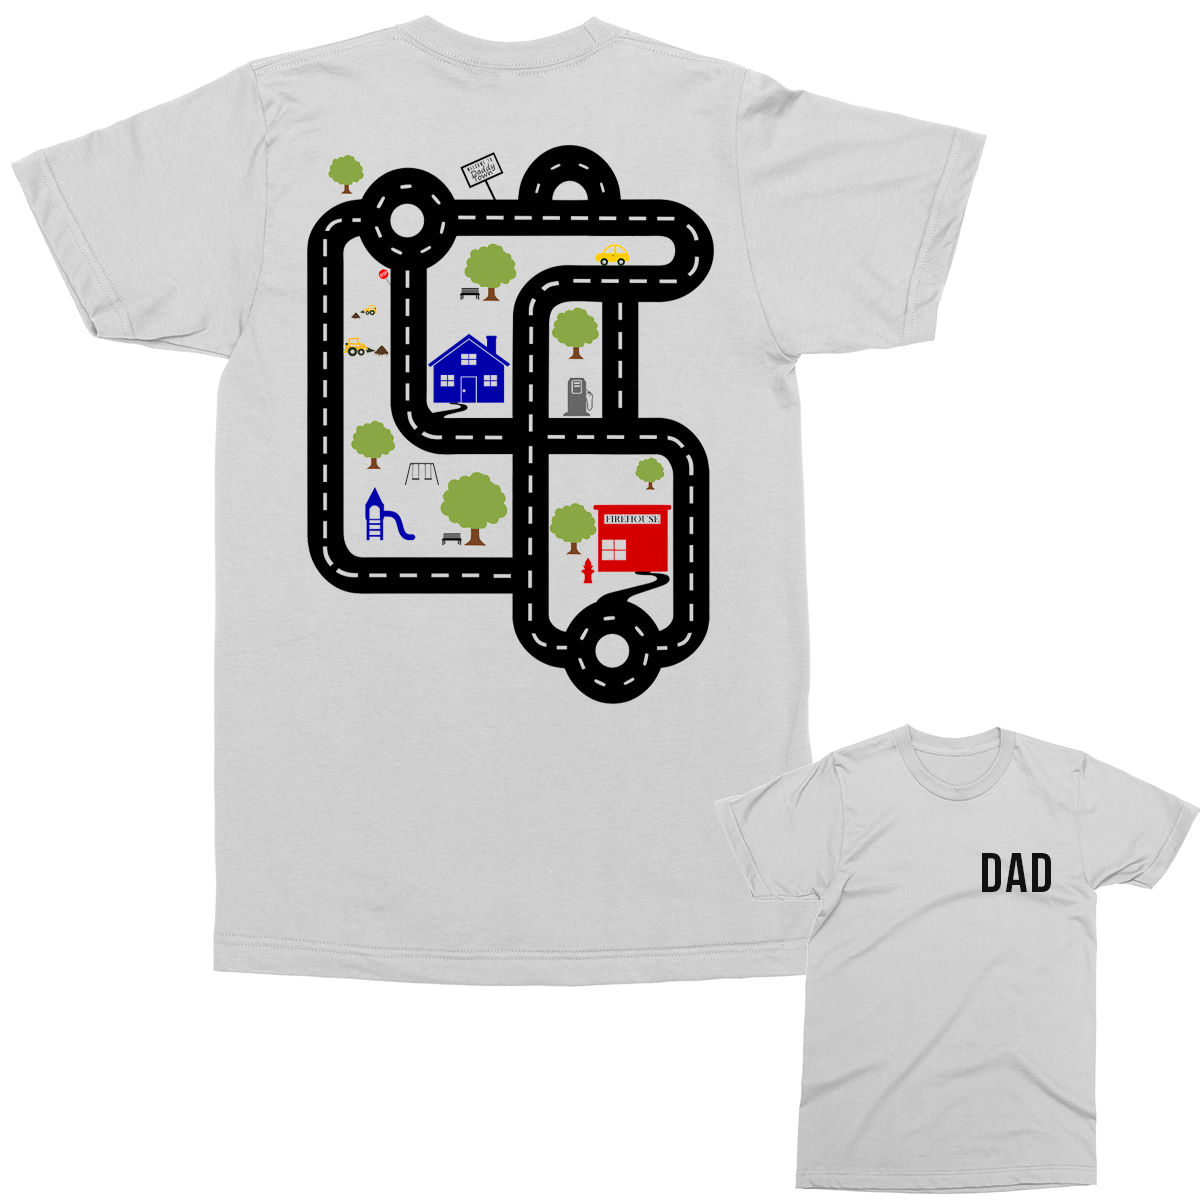 Personalised car mat white t-shirt. Perfect gift idea!